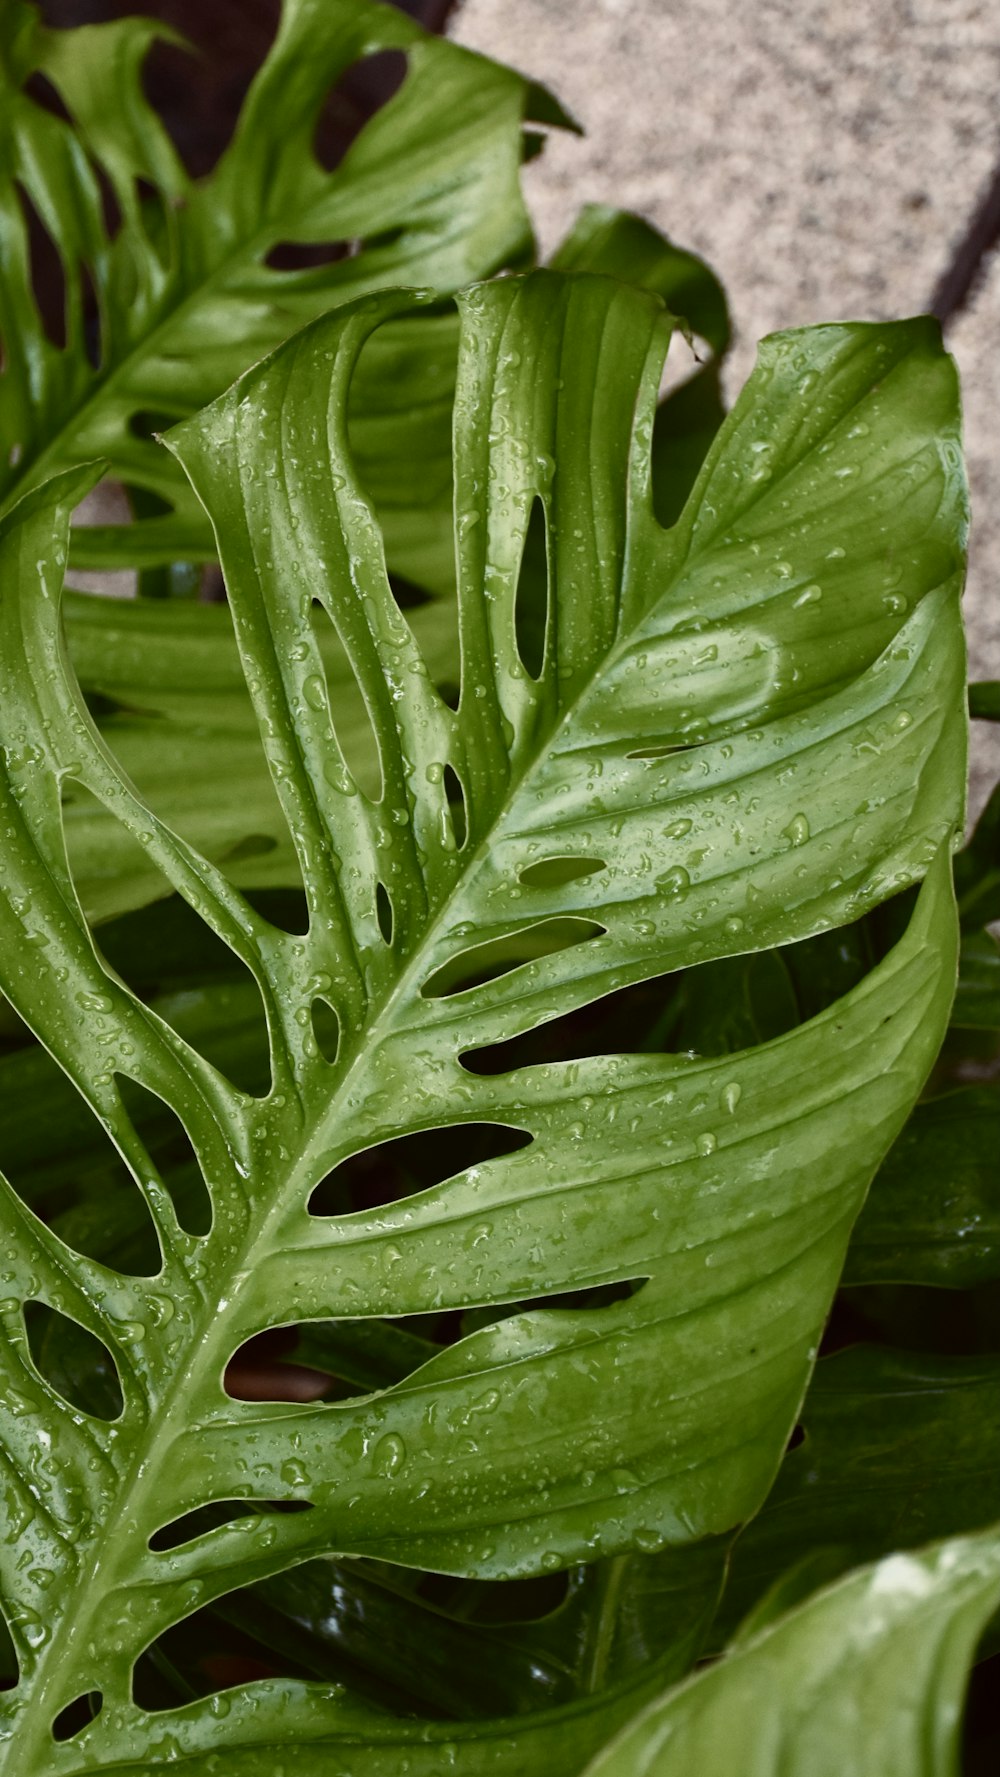 water droplets on green plant